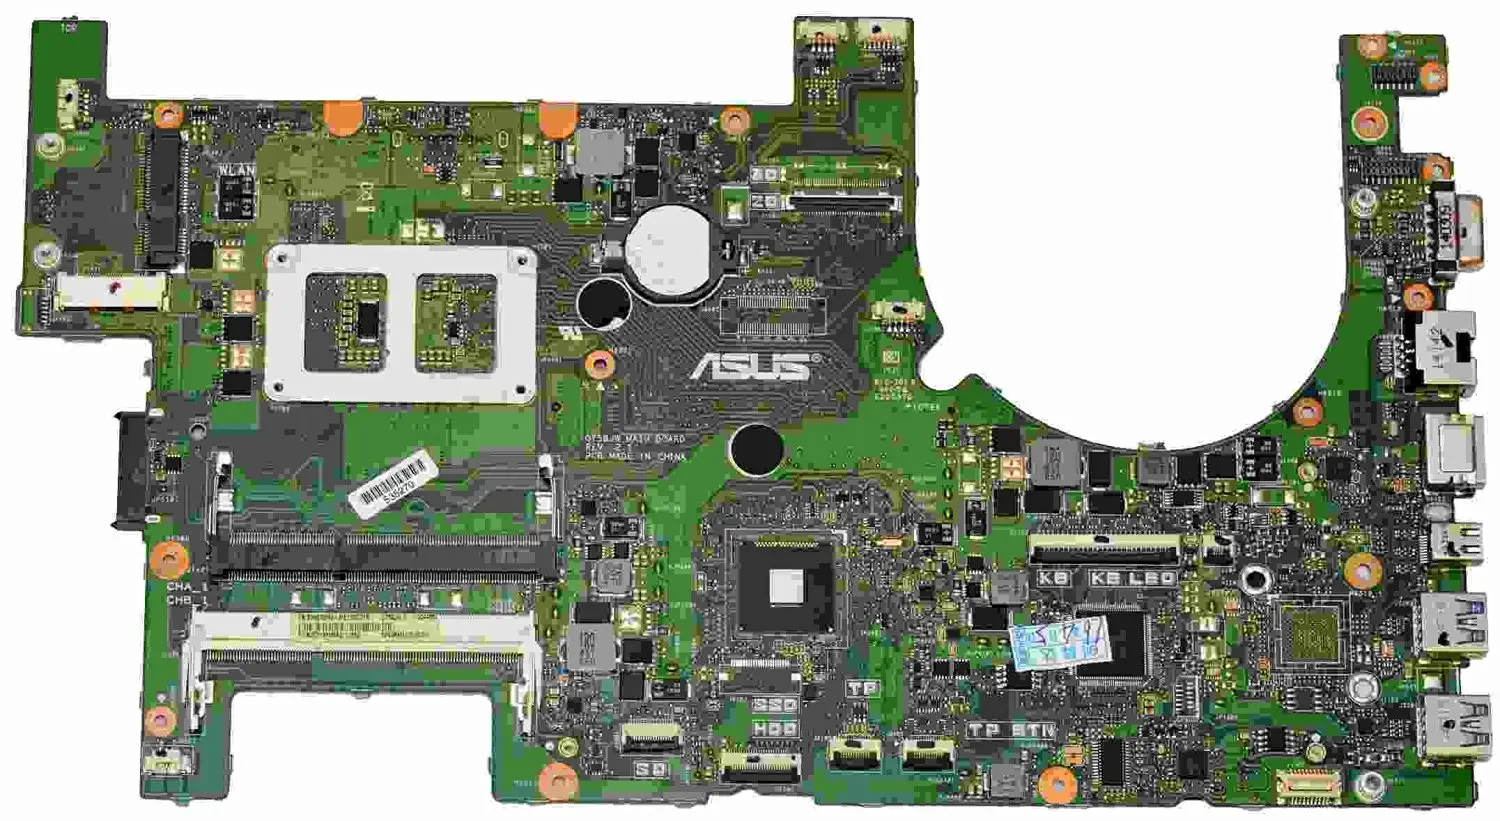 Cheap Asus 2 Cpu Motherboard, find Asus 2 Cpu Motherboard deals on line